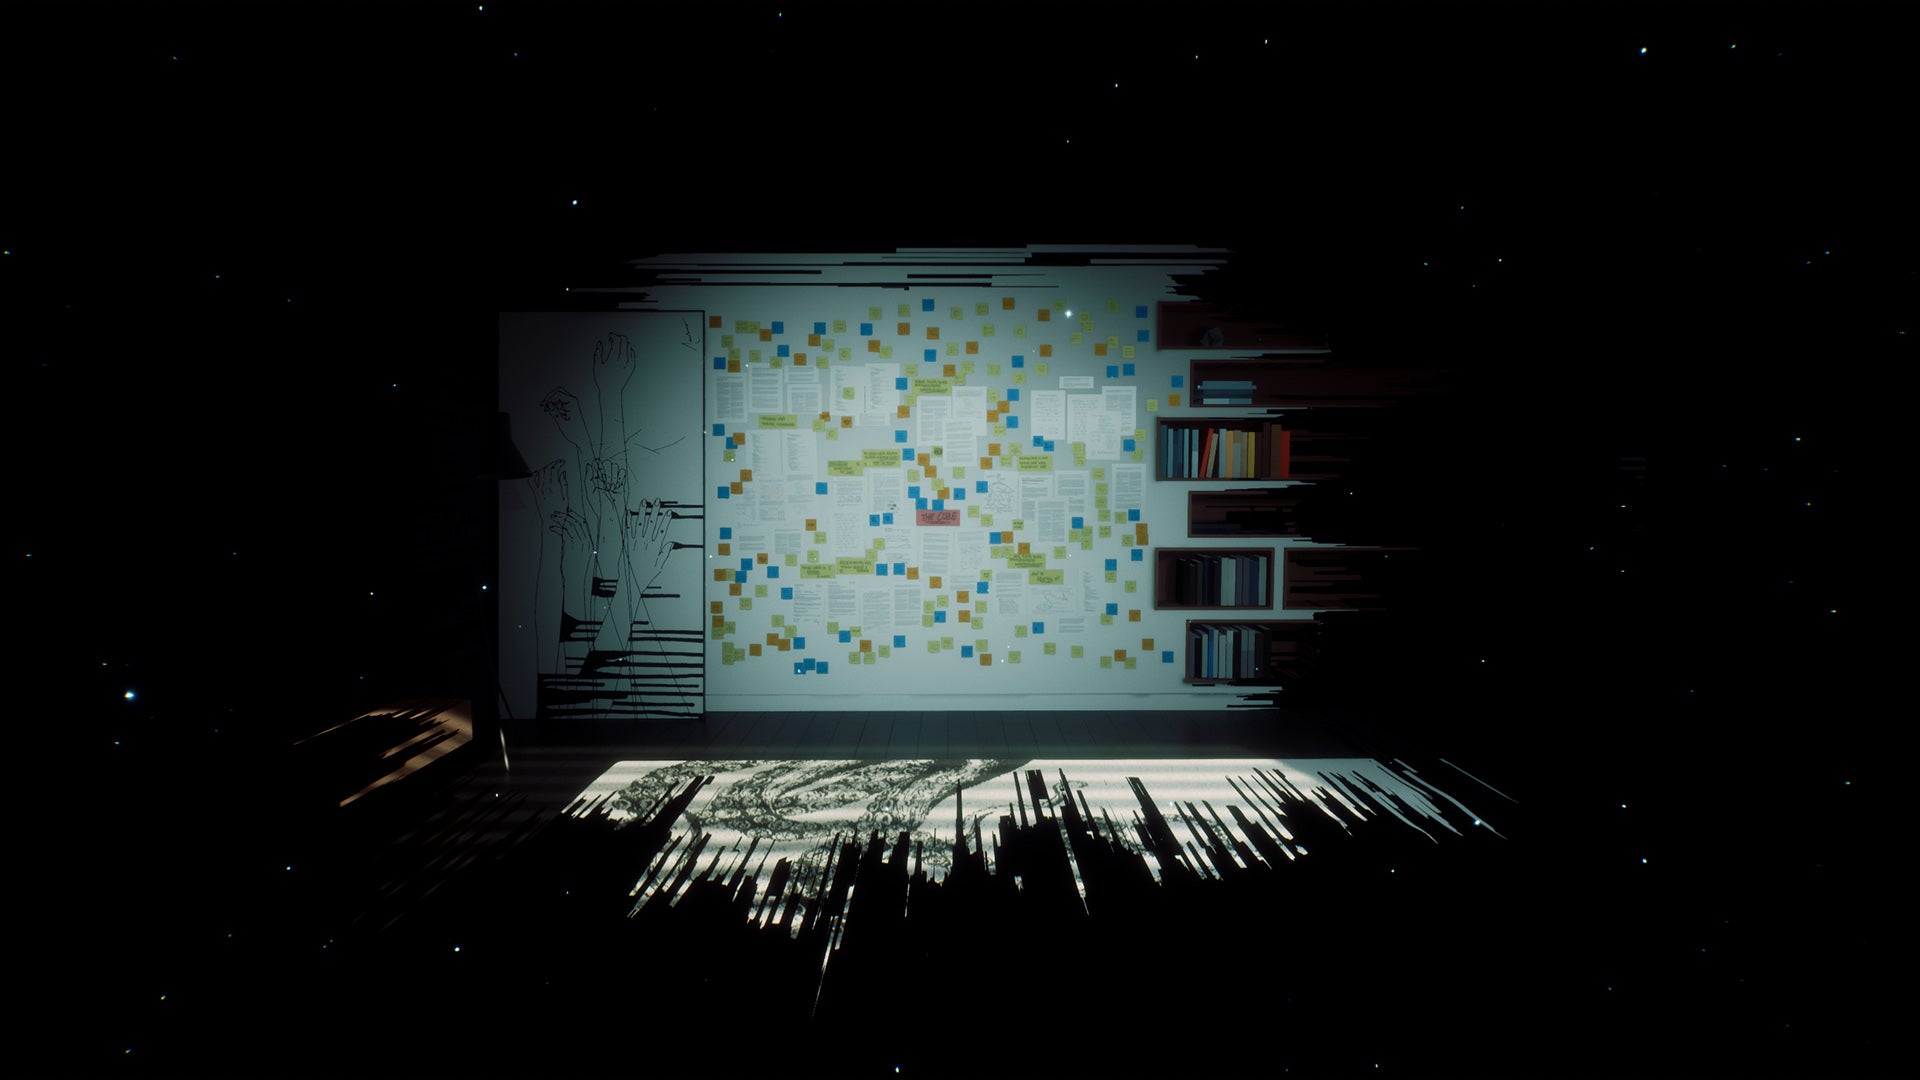 A bedroom almost completely in the dark with a board on the wall and many notes and tokens stuck to it. Someone is mapping something big.